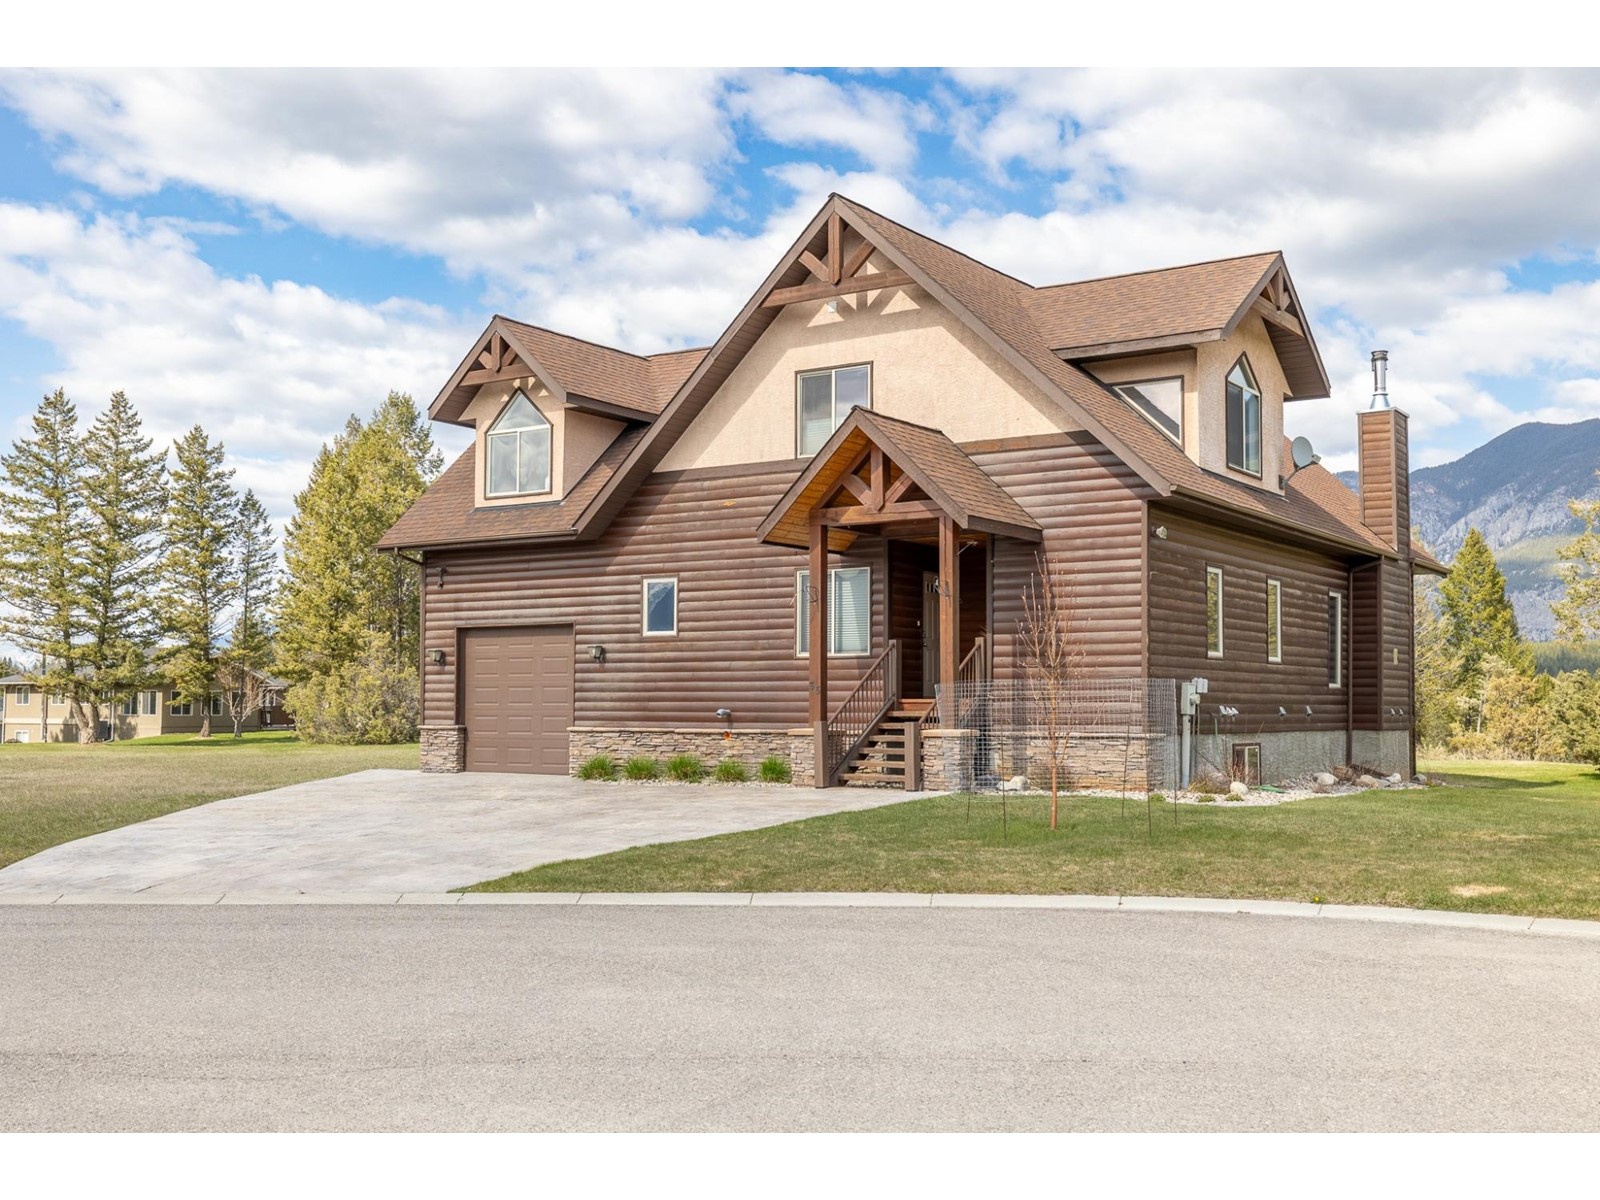 33 - 640 UPPER LAKEVIEW ROAD, invermere, British Columbia